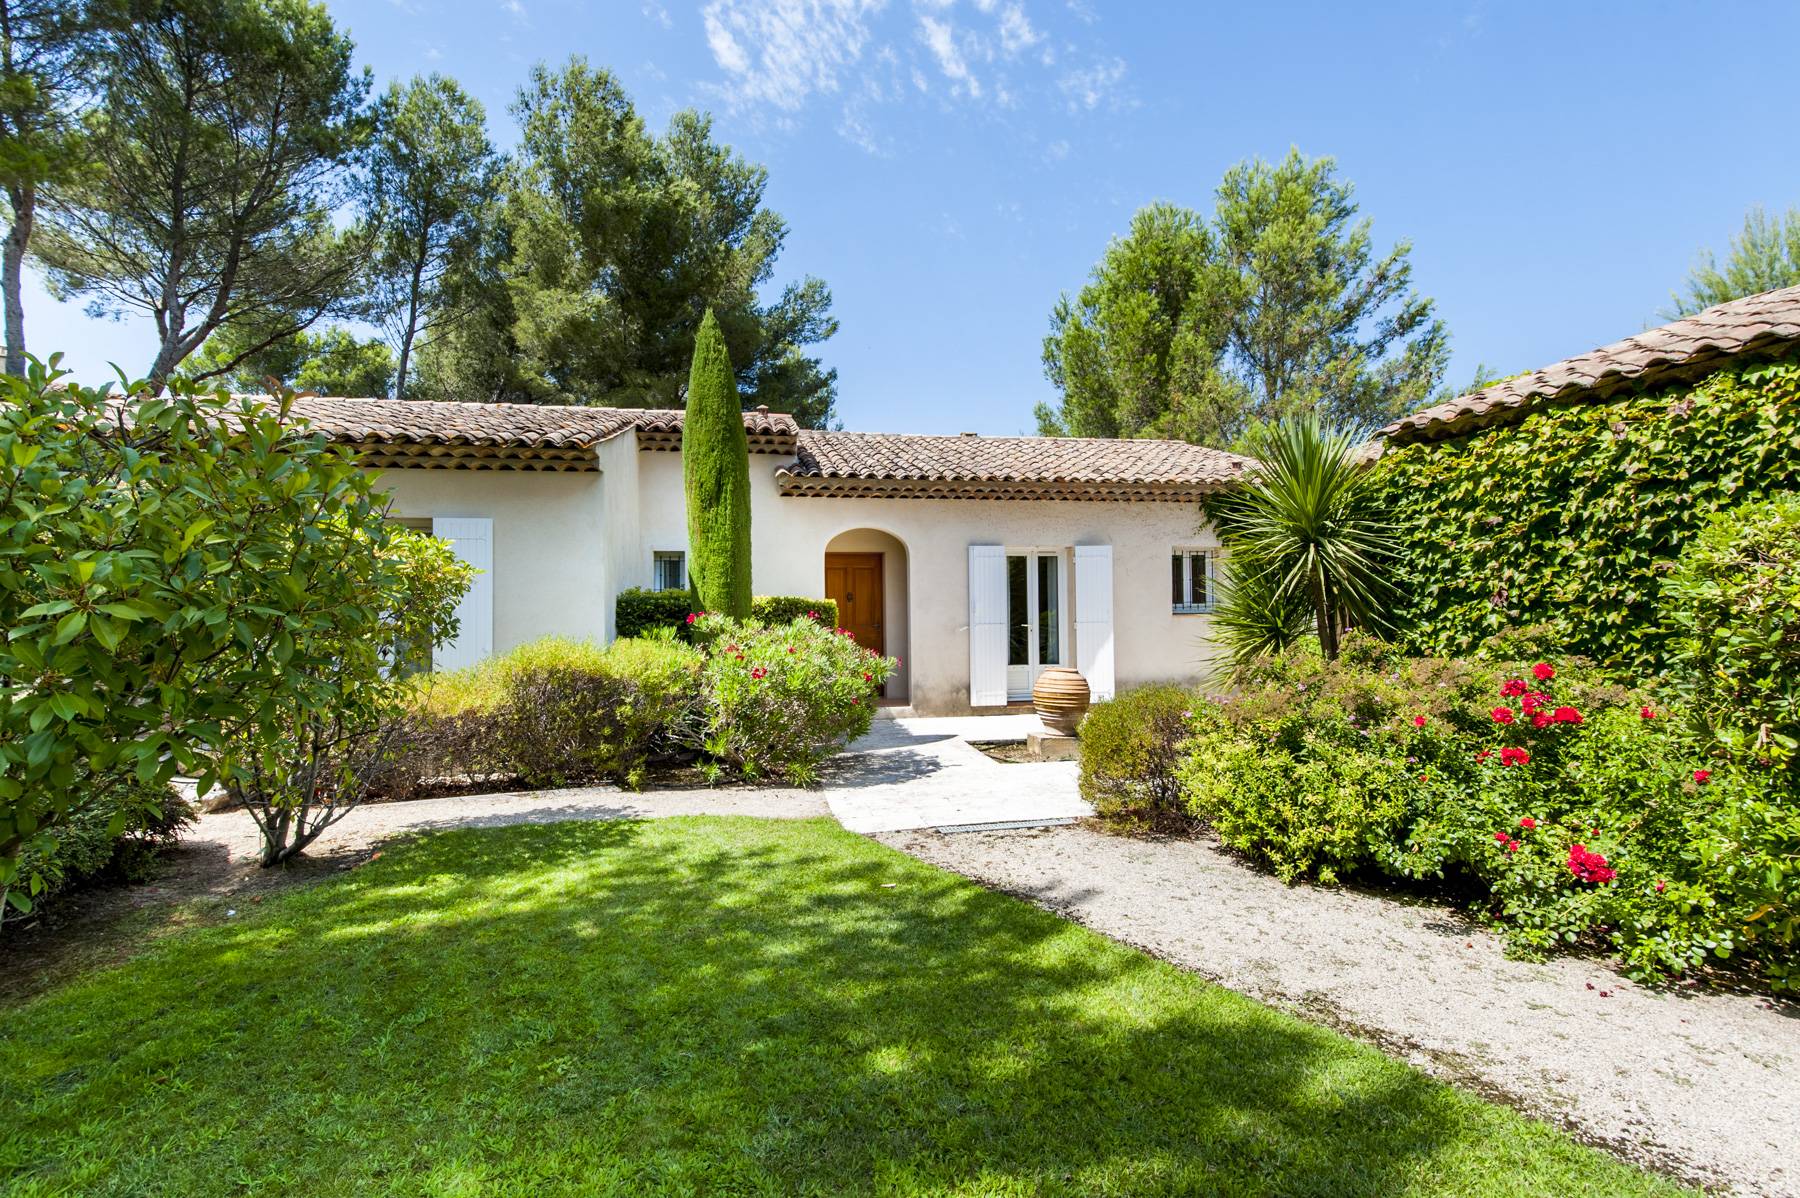 Excellently situated villa in the heart of the domaine of Pont Royal